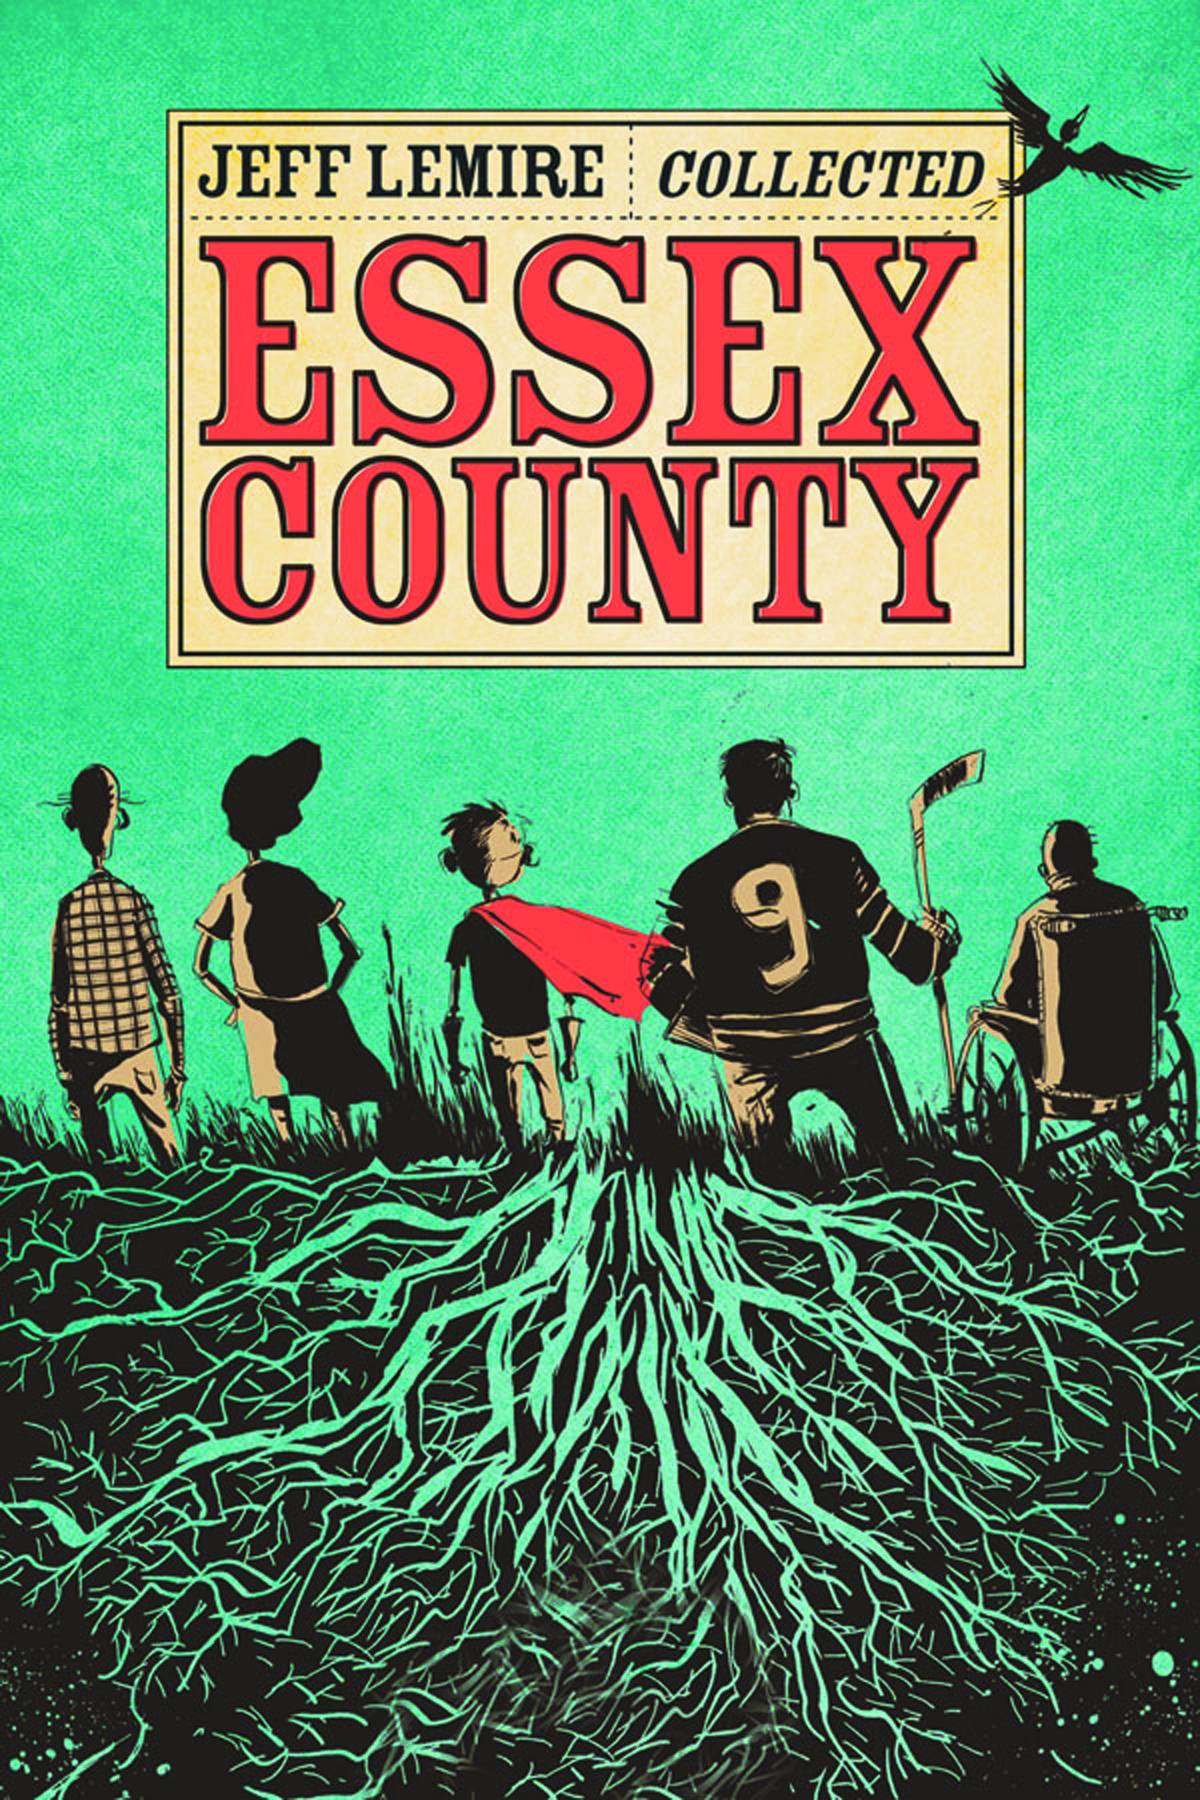 Complete Essex County